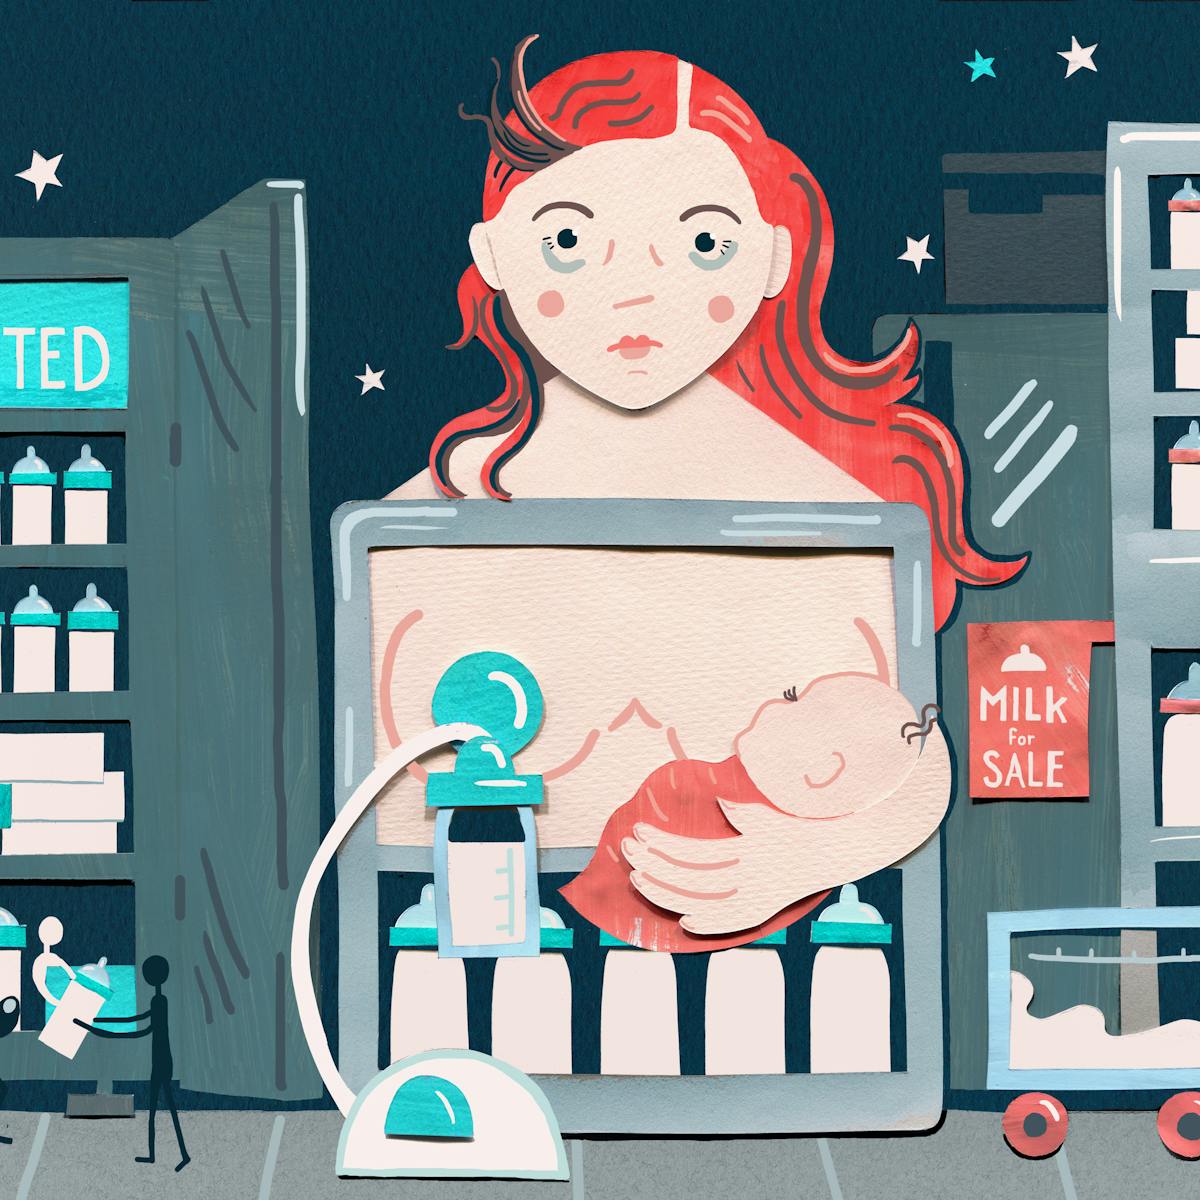 A mixed media illustration depicting a mother breastfeeding. The mother is simultaneously feeding a child and using a breast pump. She is surrounded by fridges of baby bottles filled with milk, with tiny figures of people moving the bottles around. In the background we see stars, depicting that it is nighttime.